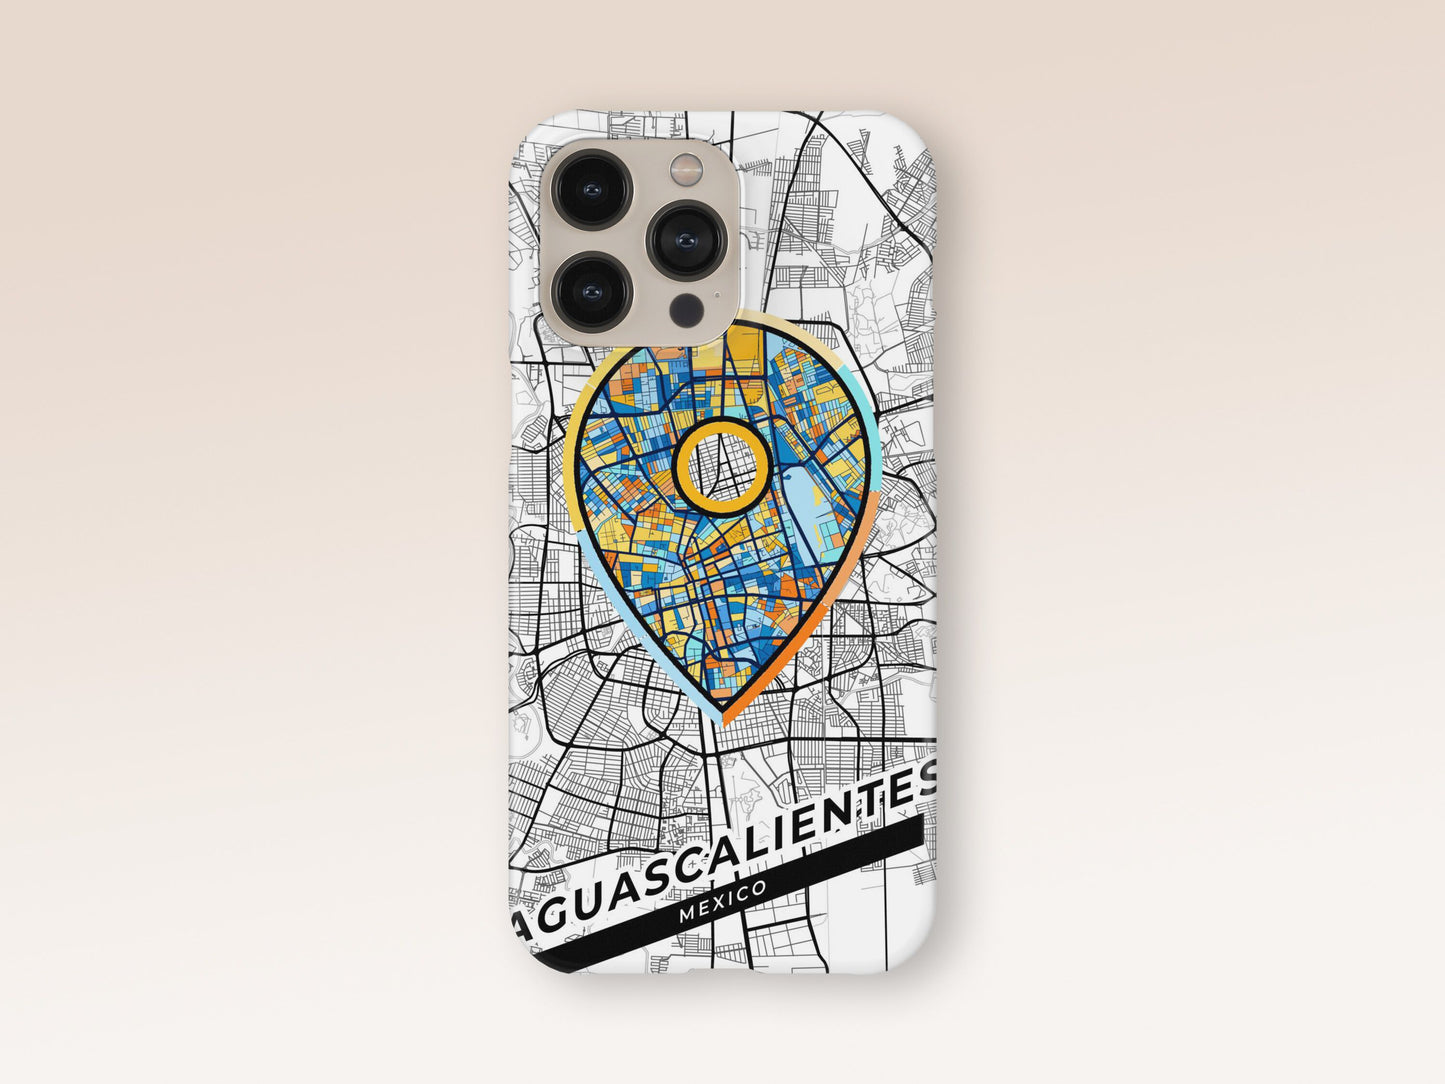 Aguascalientes Mexico slim phone case with colorful icon. Birthday, wedding or housewarming gift. Couple match cases. 1